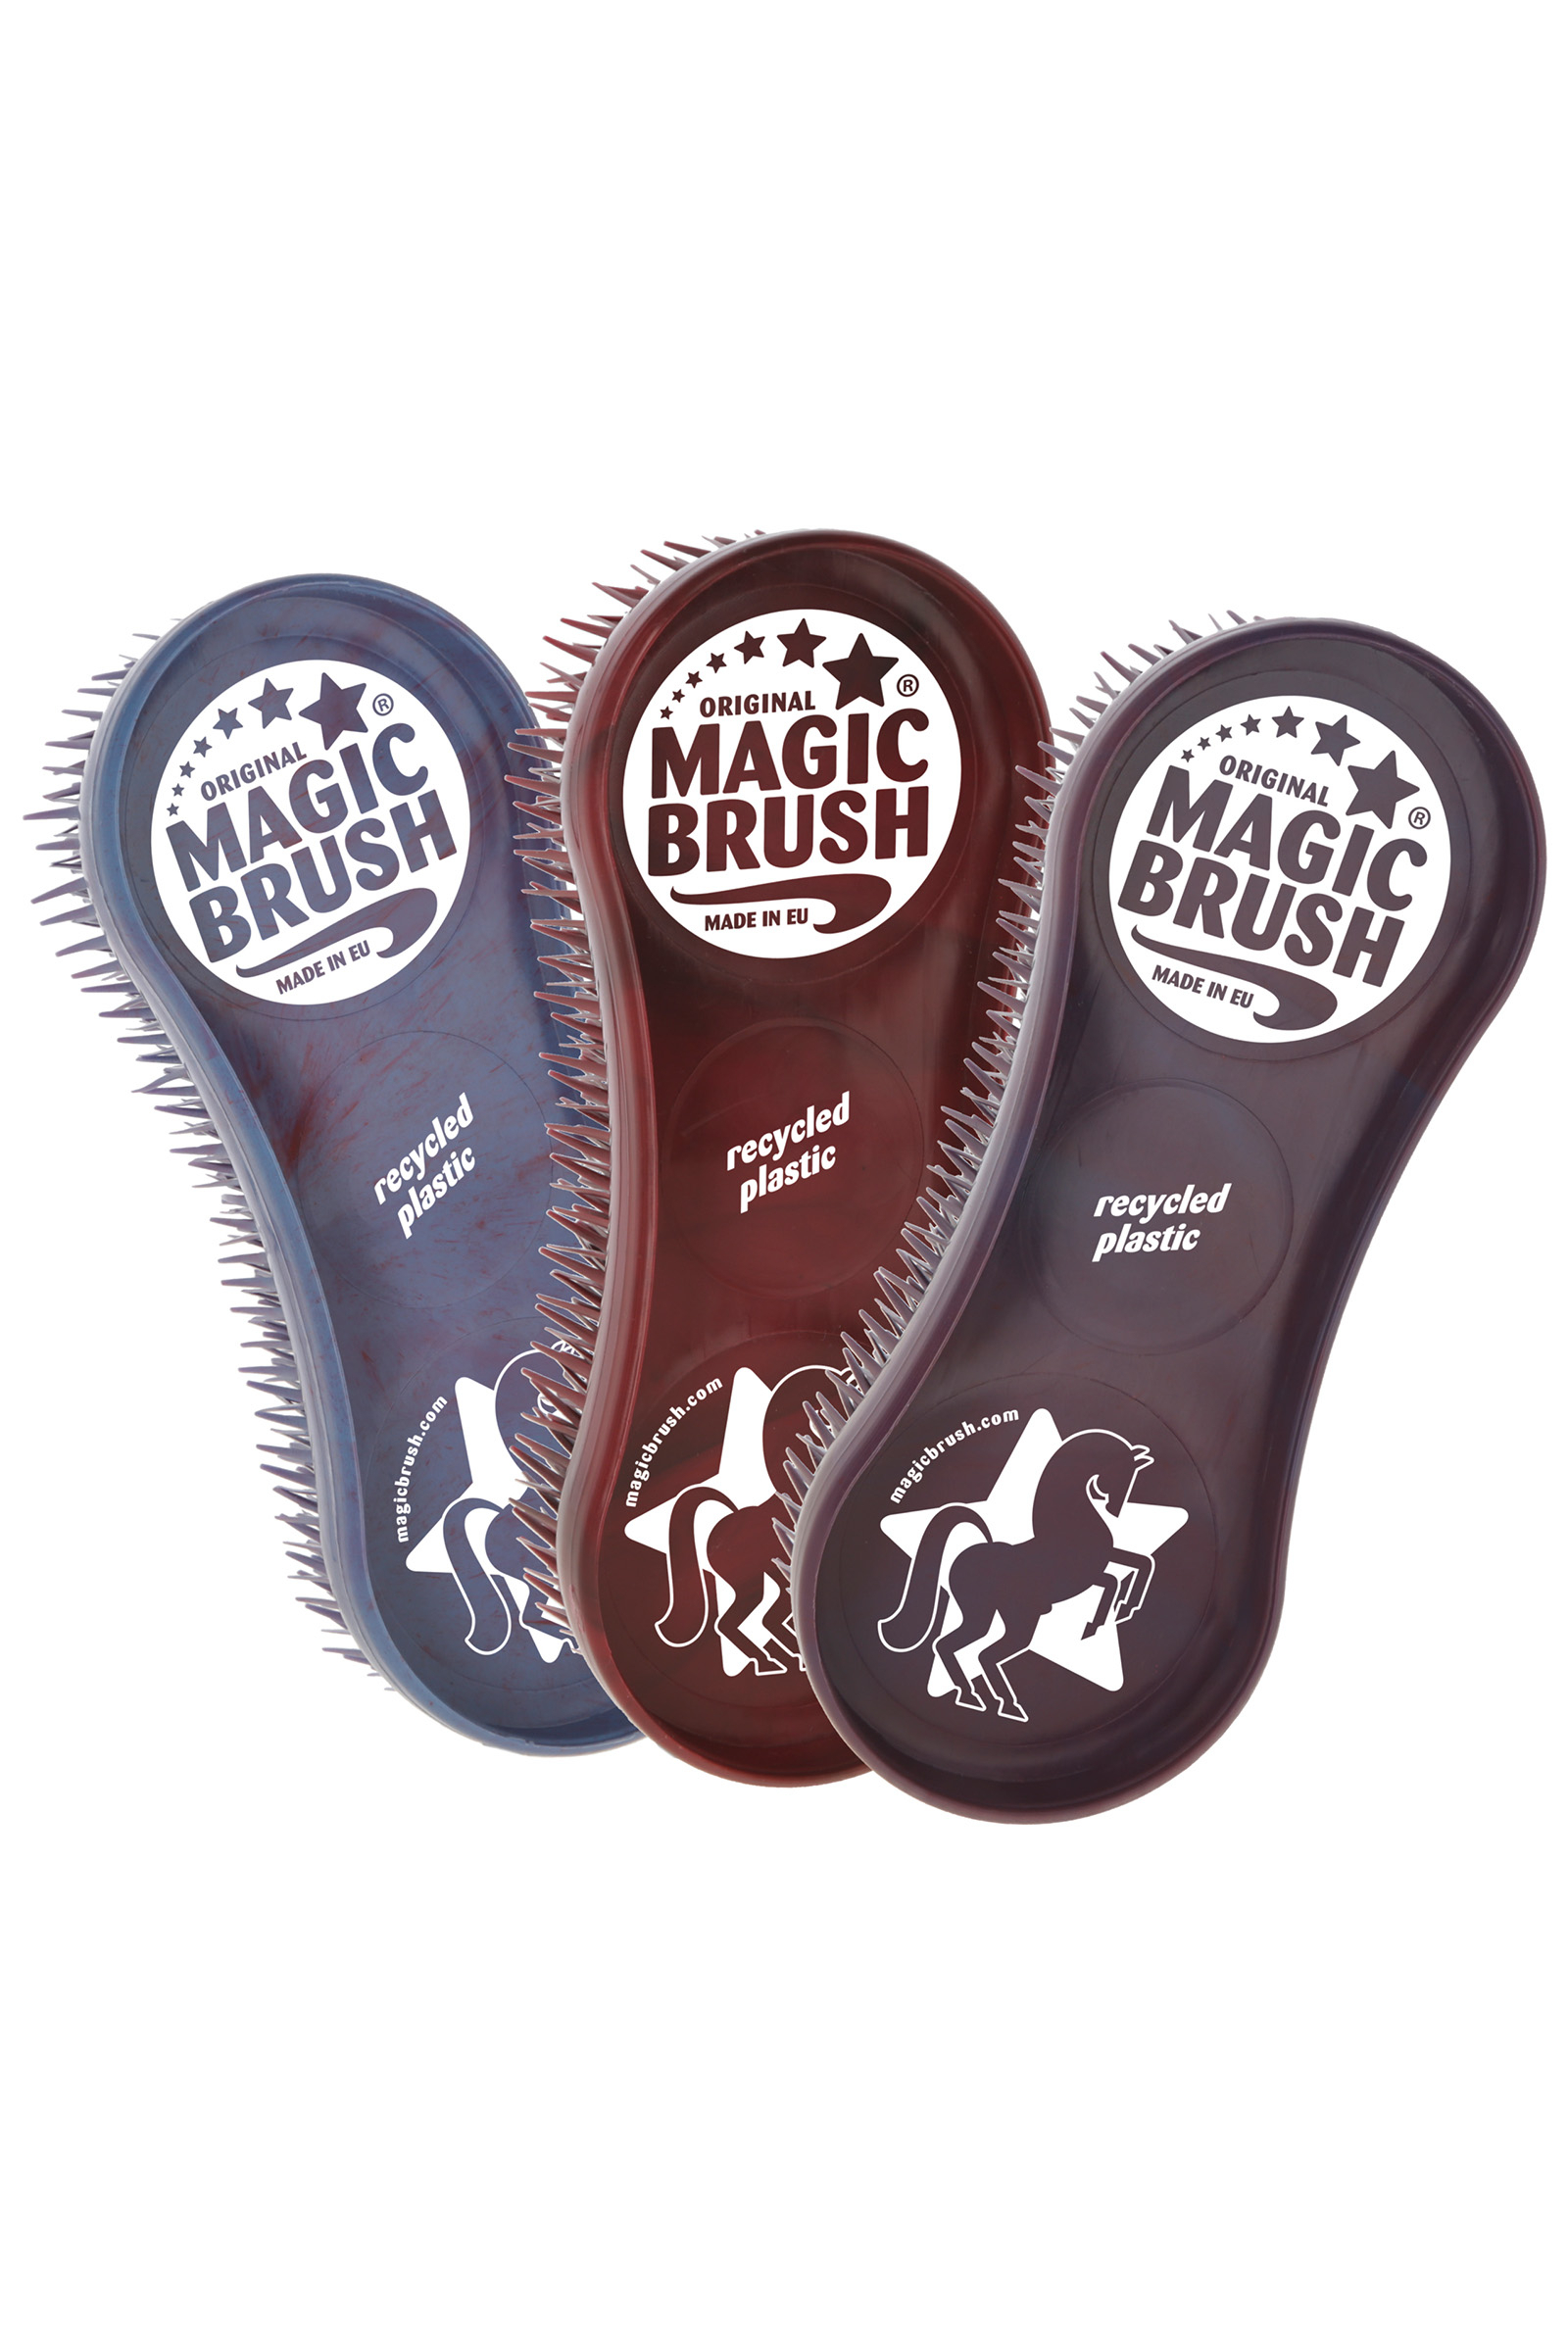 Buy affordable Magic Brush now